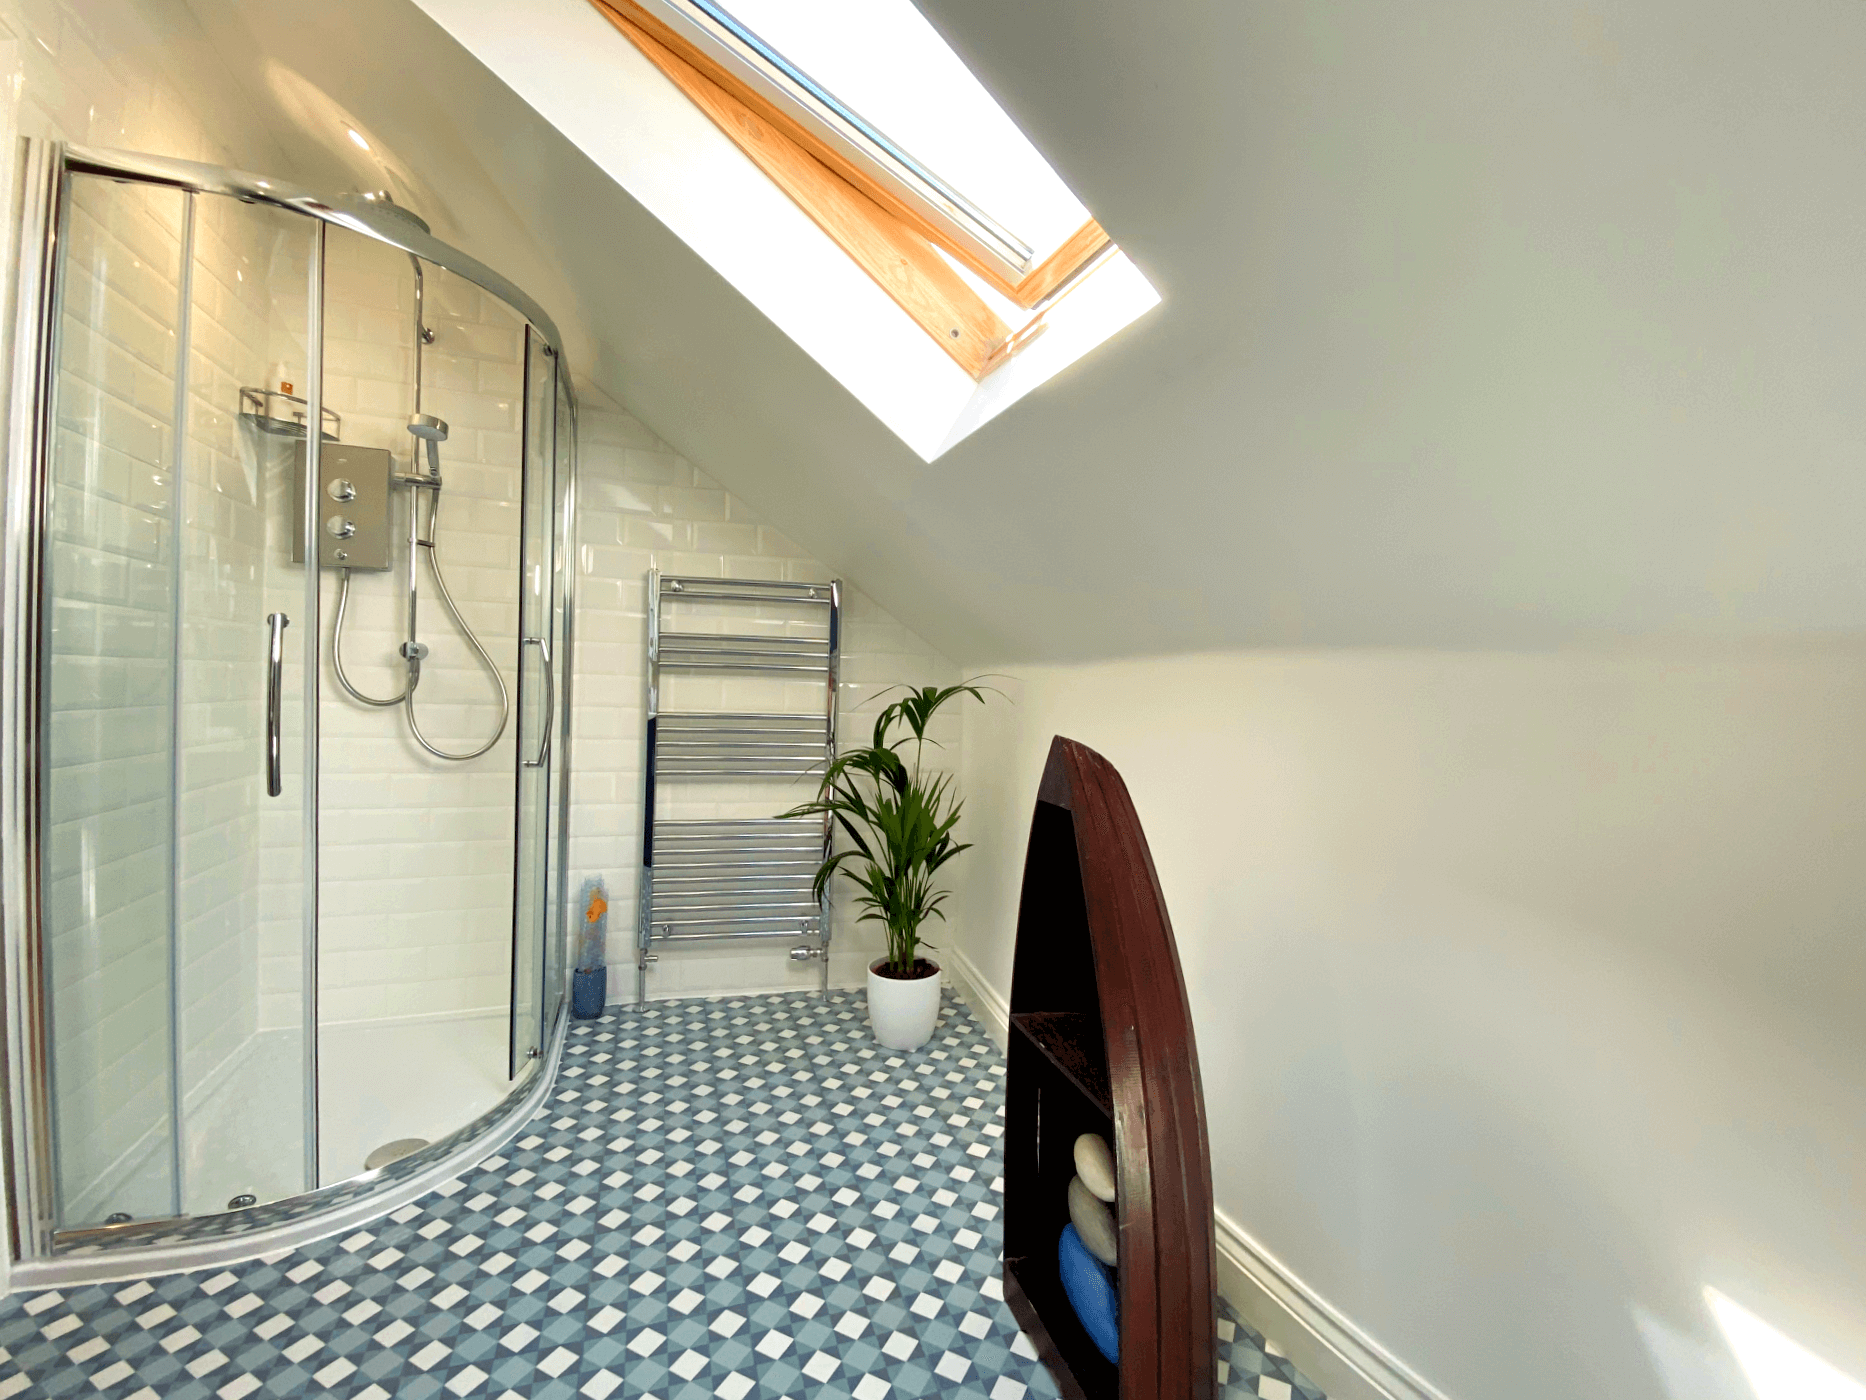 Lisburne Place Luxury Town House self catering accommodation - ensuite bathroom